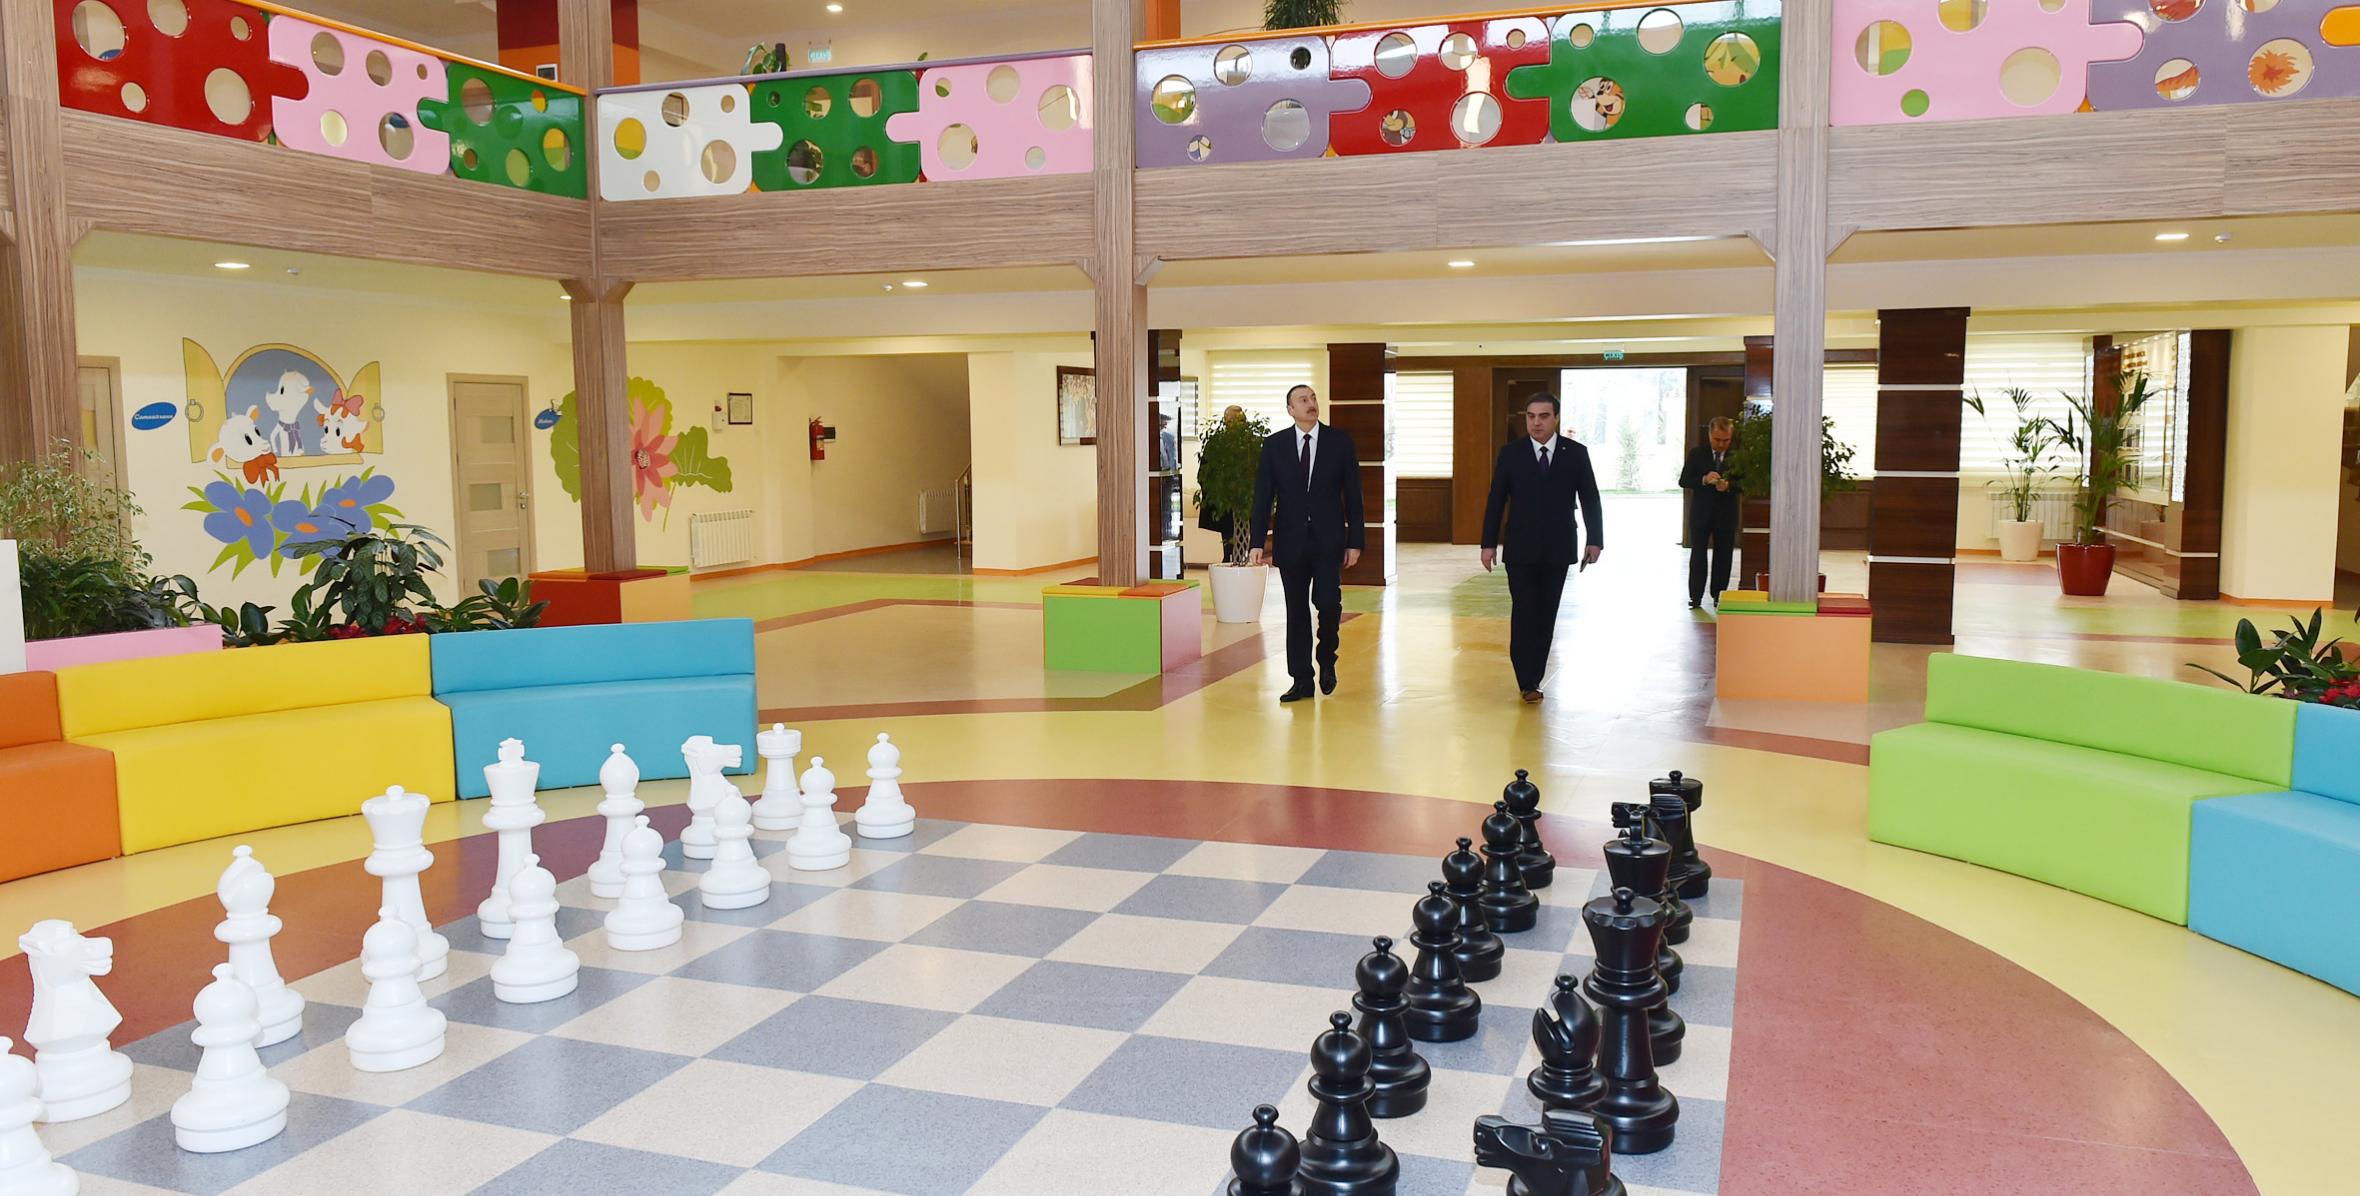 Ilham Aliyev attended the opening of a kindergarten, the construction of which was initiated by the Heydar Aliyev Foundation